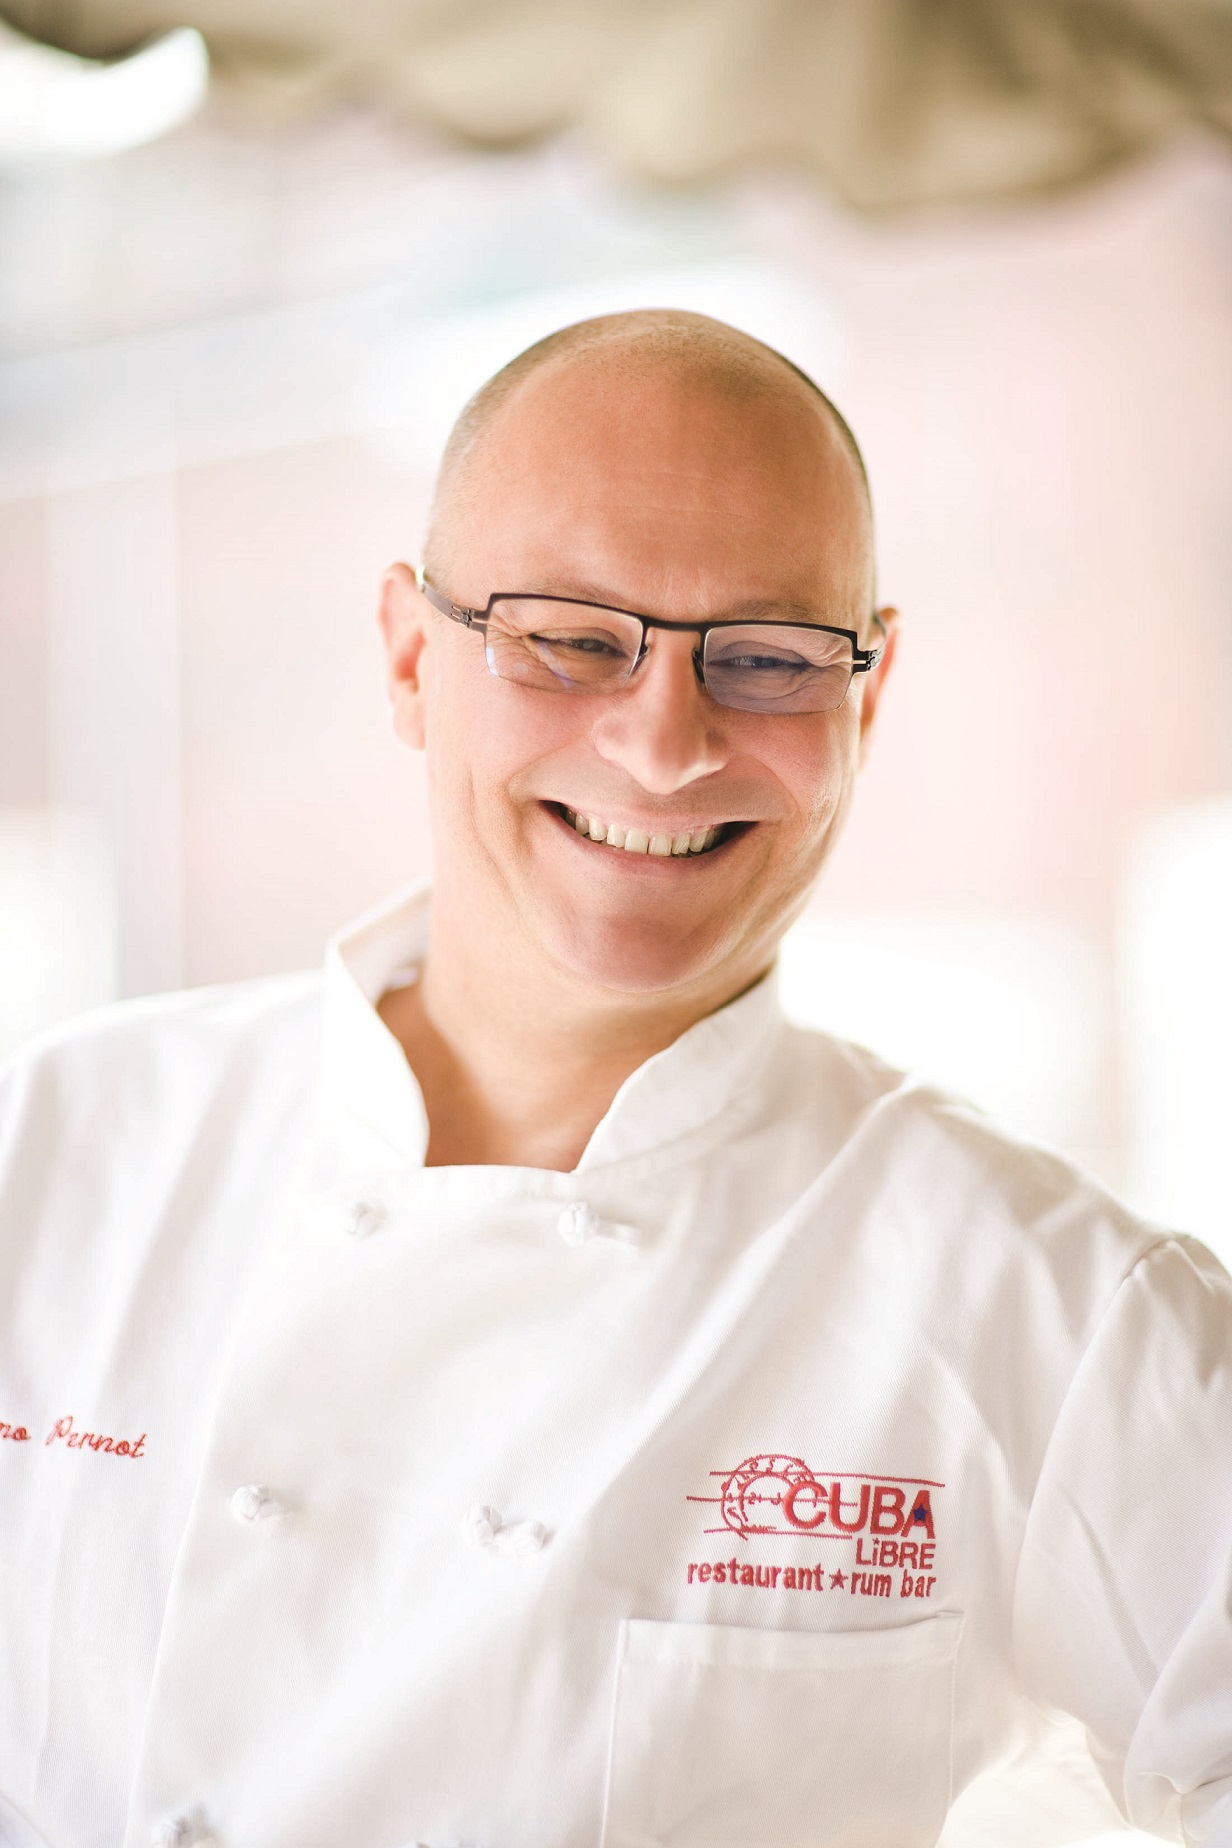 The culinary program at Cuba Libre San Juan will be led by the vision of two-time James Beard award-winning Chef-Partner Guillermo Pernot.